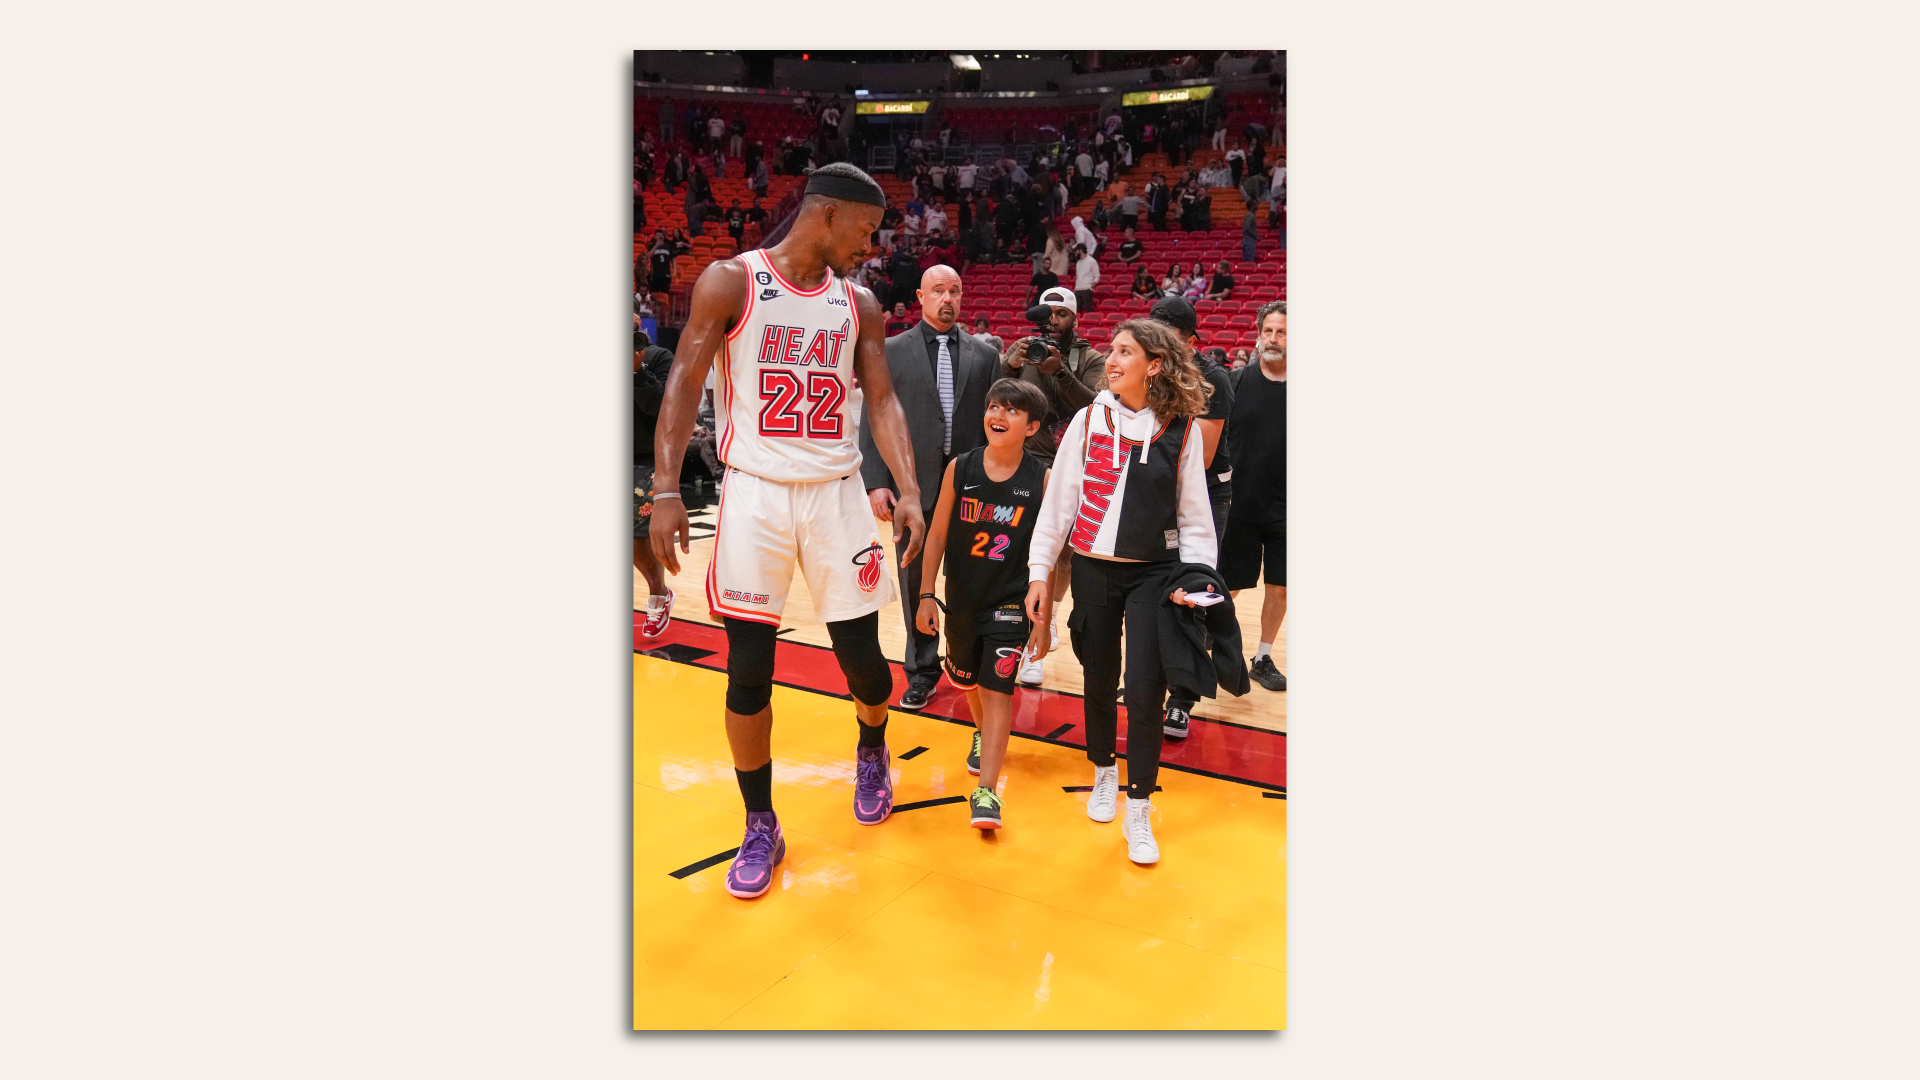 Miami Heat player Jimmy Butler walks with two fans on the court after a game.